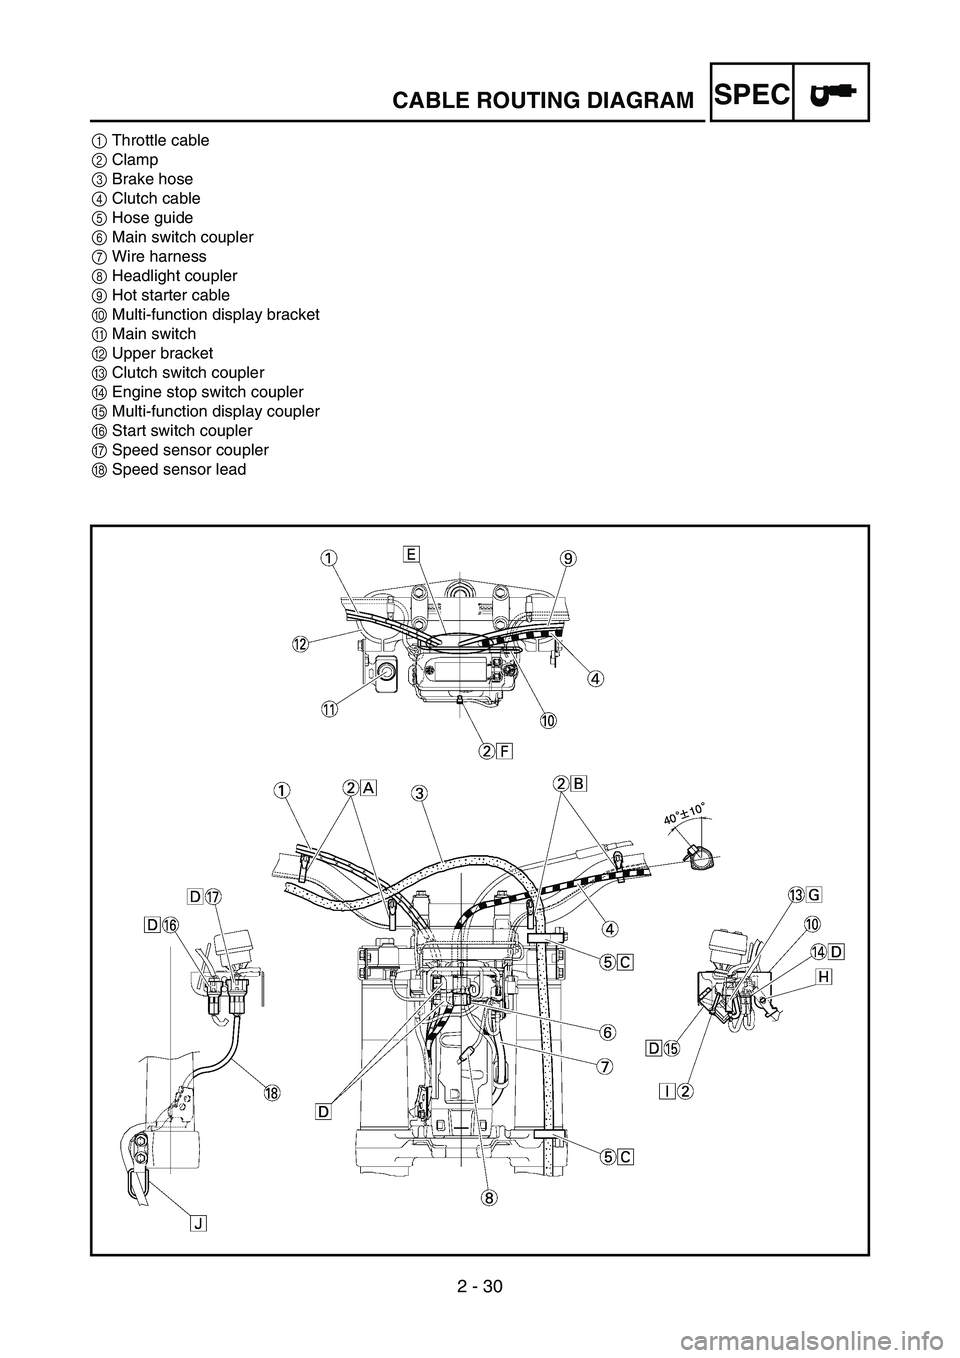 YAMAHA WR 450F 2007  Manuale de Empleo (in Spanish) 2 - 30
SPECCABLE ROUTING DIAGRAM
1Throttle cable
2Clamp
3Brake hose
4Clutch cable
5Hose guide
6Main switch coupler
7Wire harness
8Headlight coupler
9Hot starter cable
0Multi-function display bracket
A